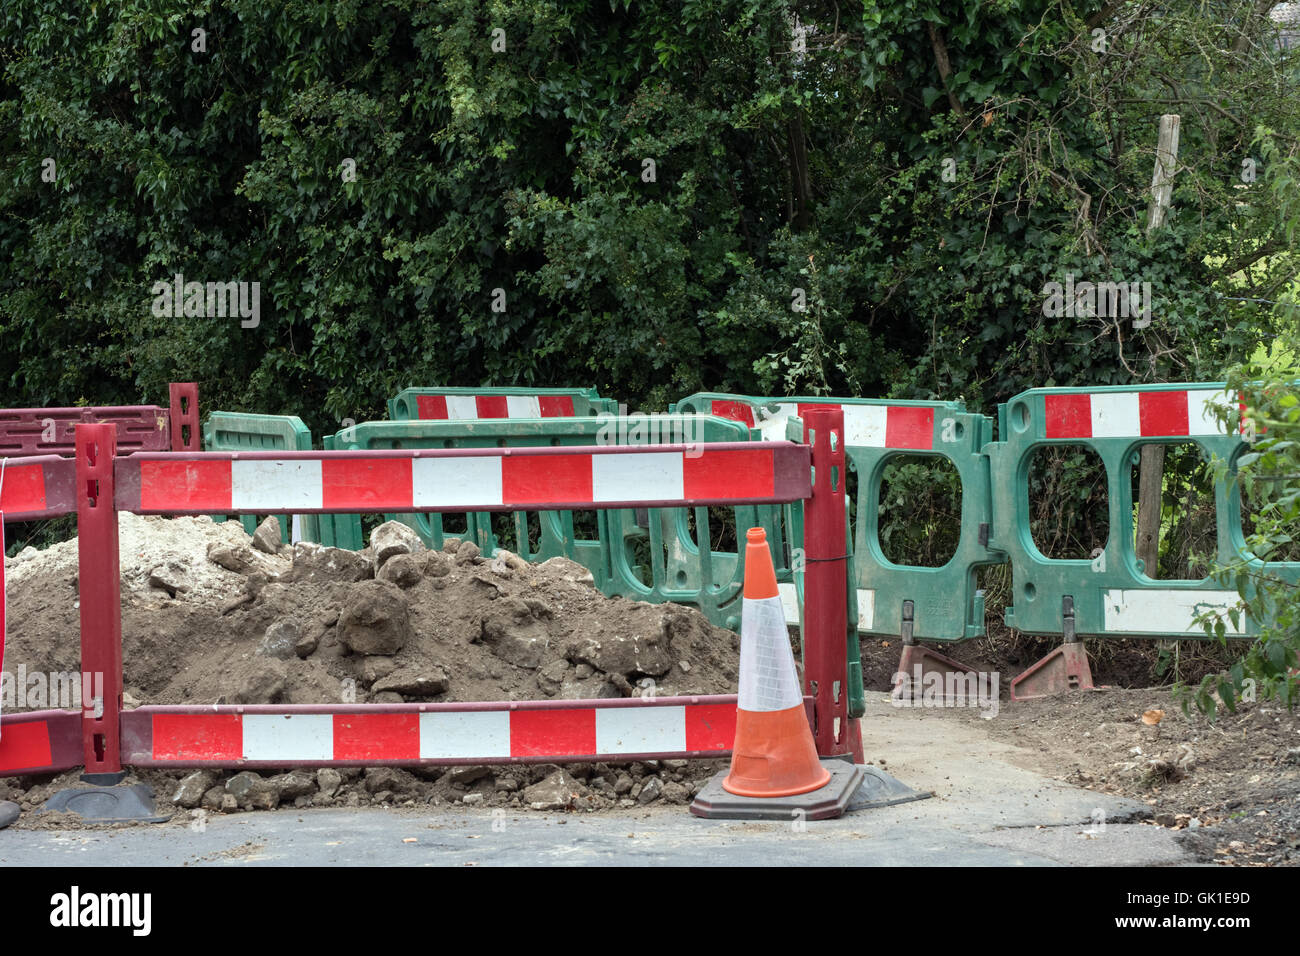 Barriers around road works Stock Photo